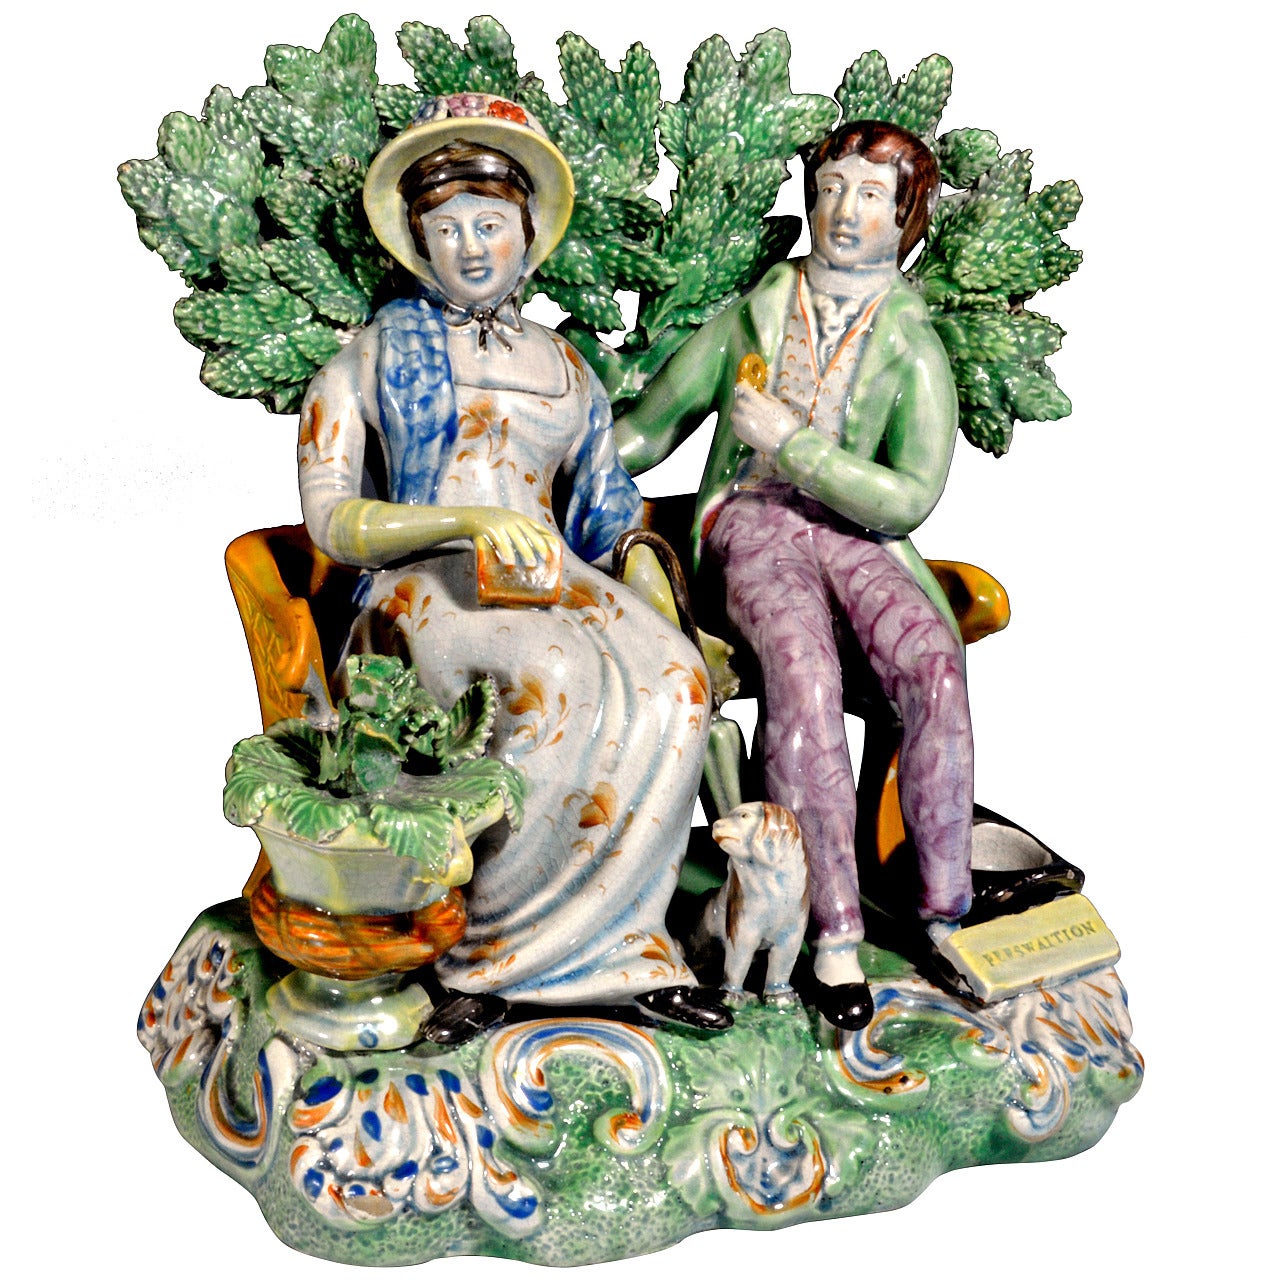 Staffordshire Pottery Figure Group Persuasion by the Patriotic Group Pot Maker.